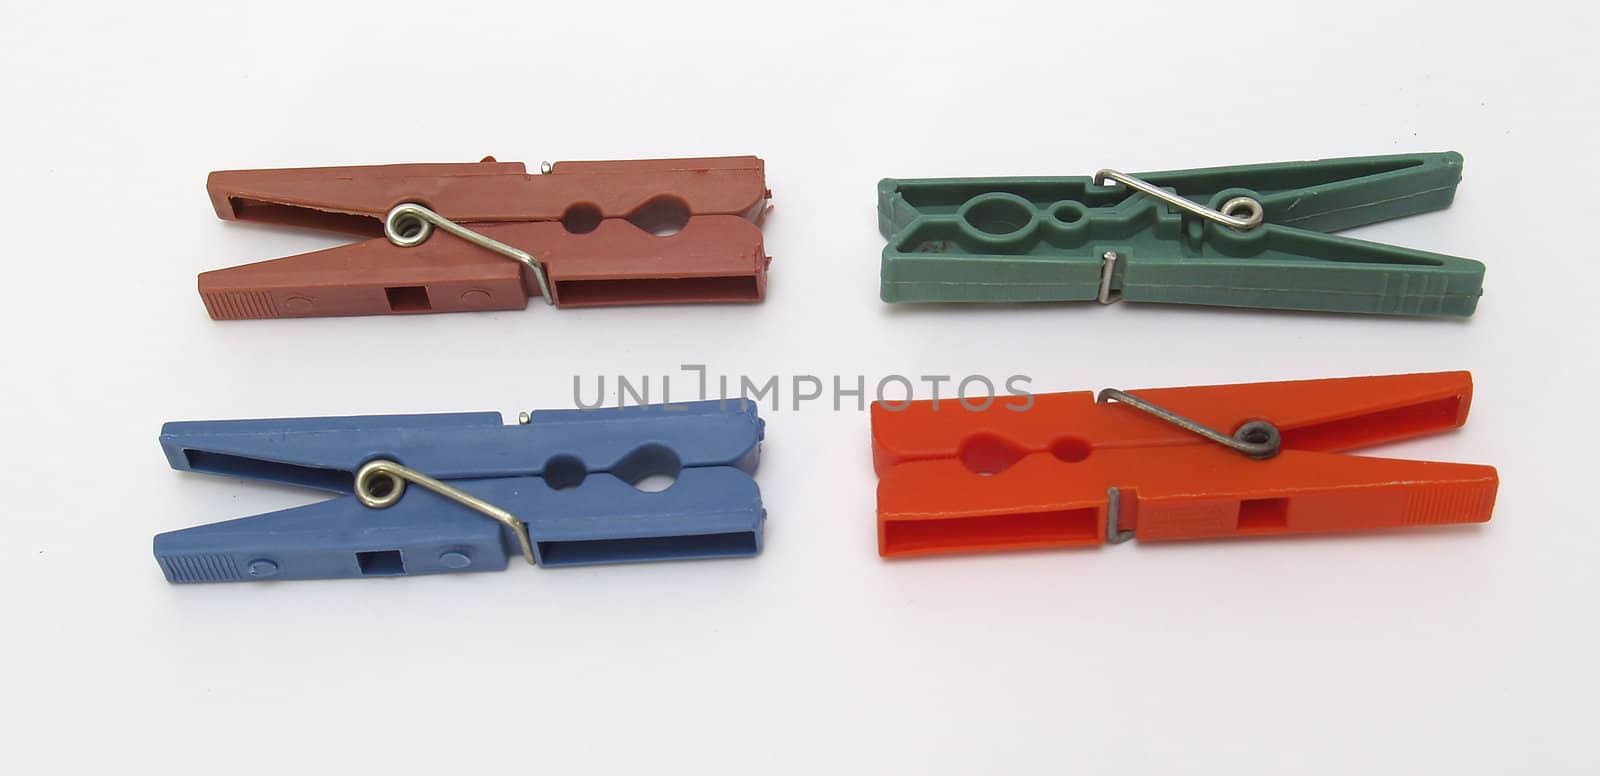 clasps to hold clothes